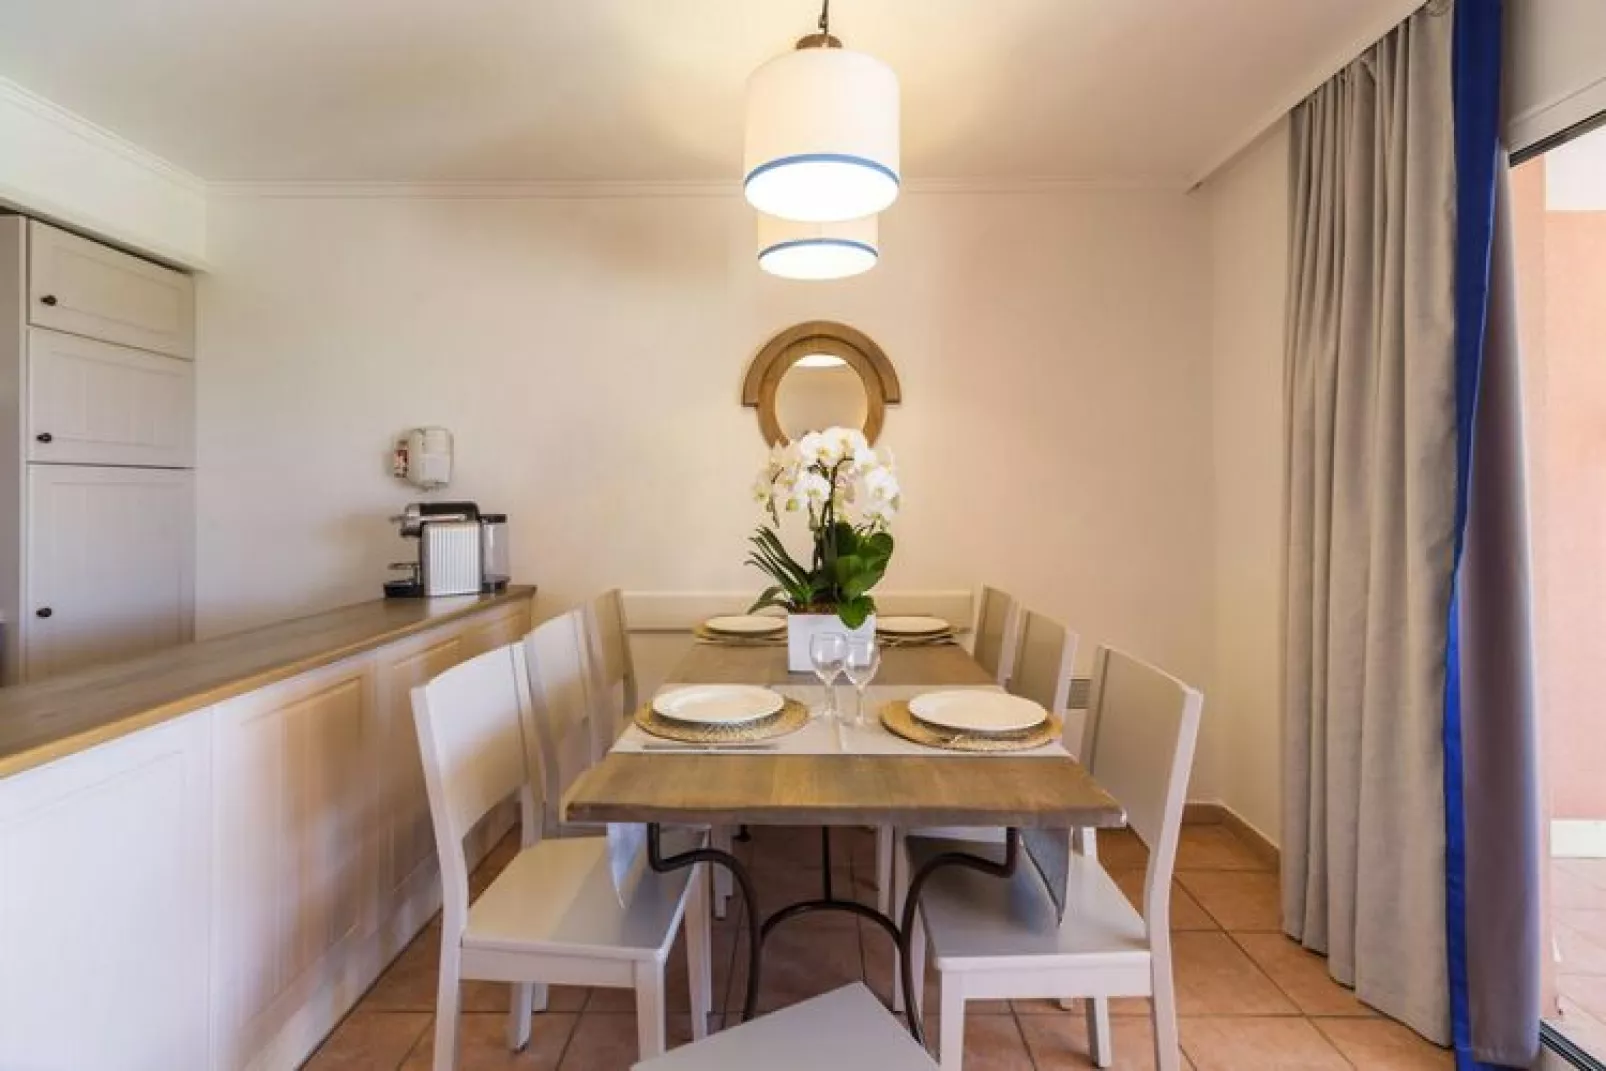 Residence Les Calanques, Les Issambres-14 Standard - Studio 4 p. - 1 sleeping alcove-Woonkamer